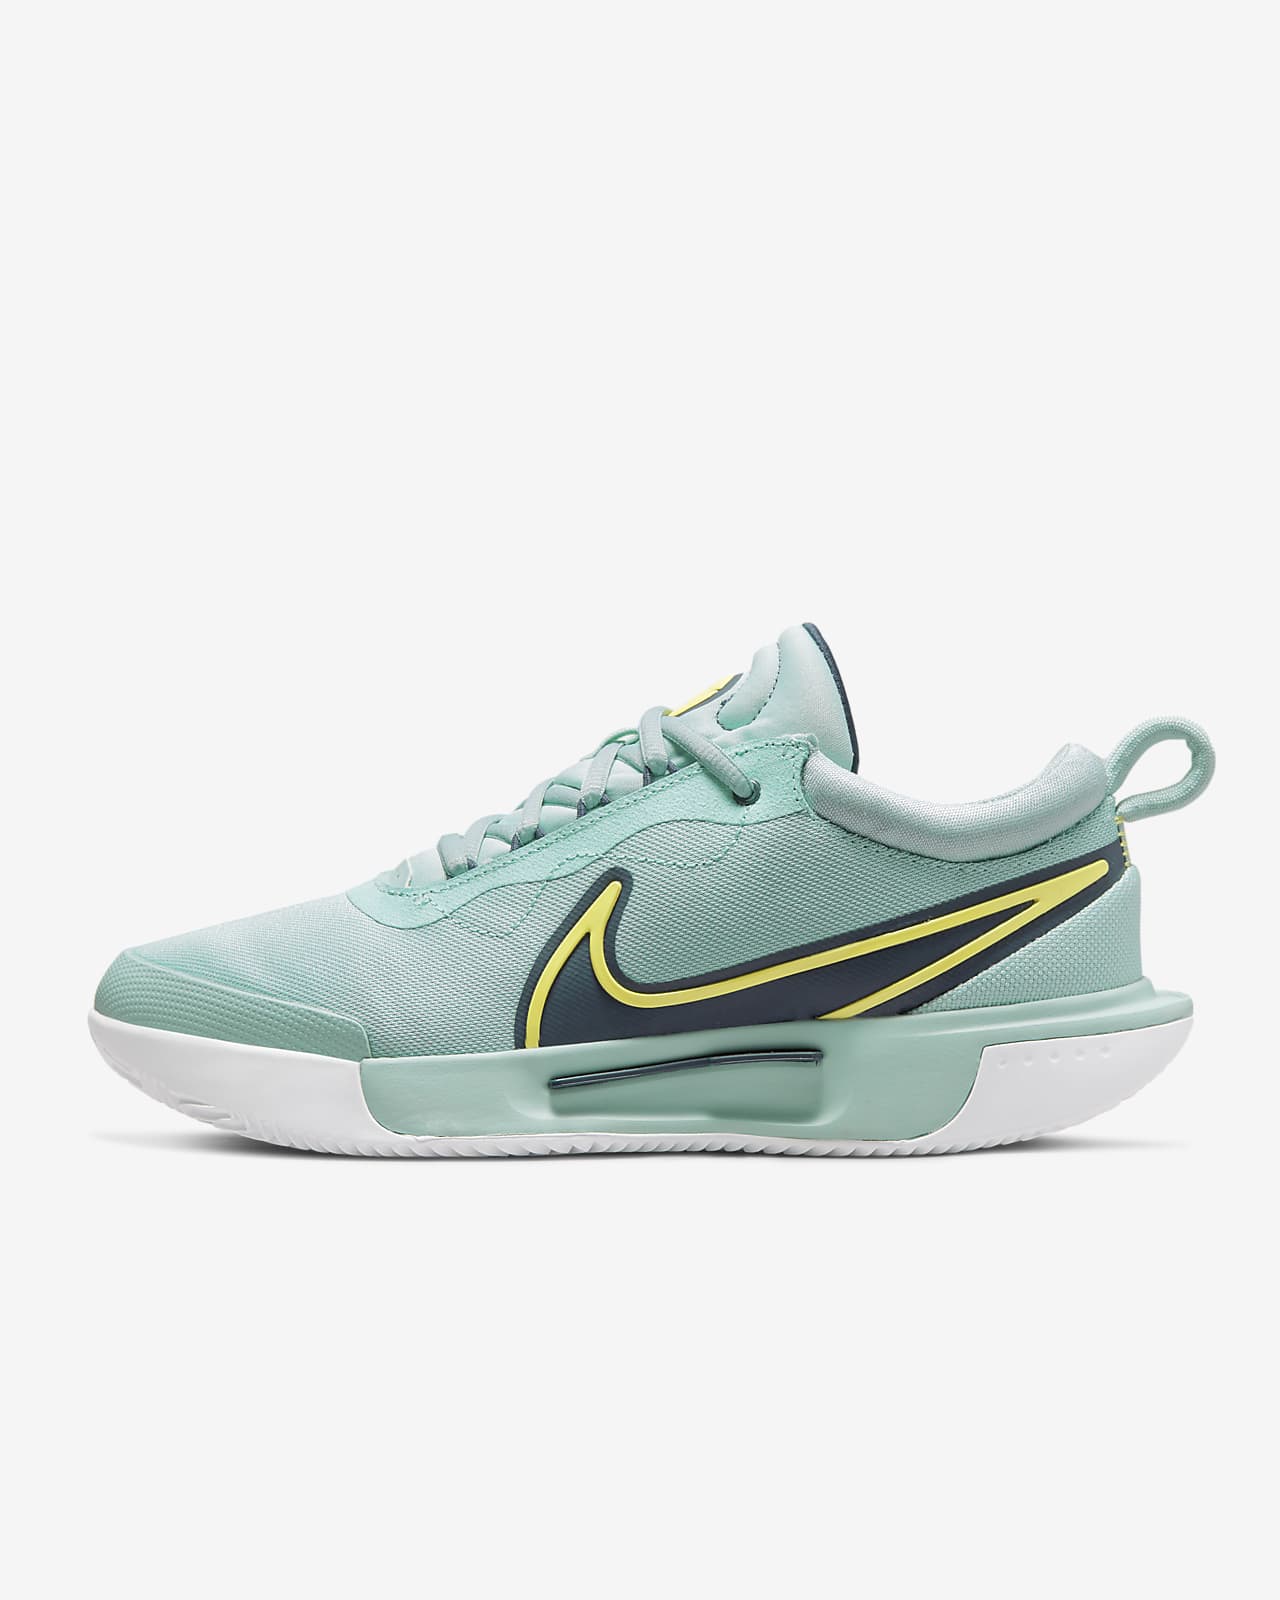 NikeCourt Zoom Pro Women's Clay Court Tennis Shoes. Nike AT